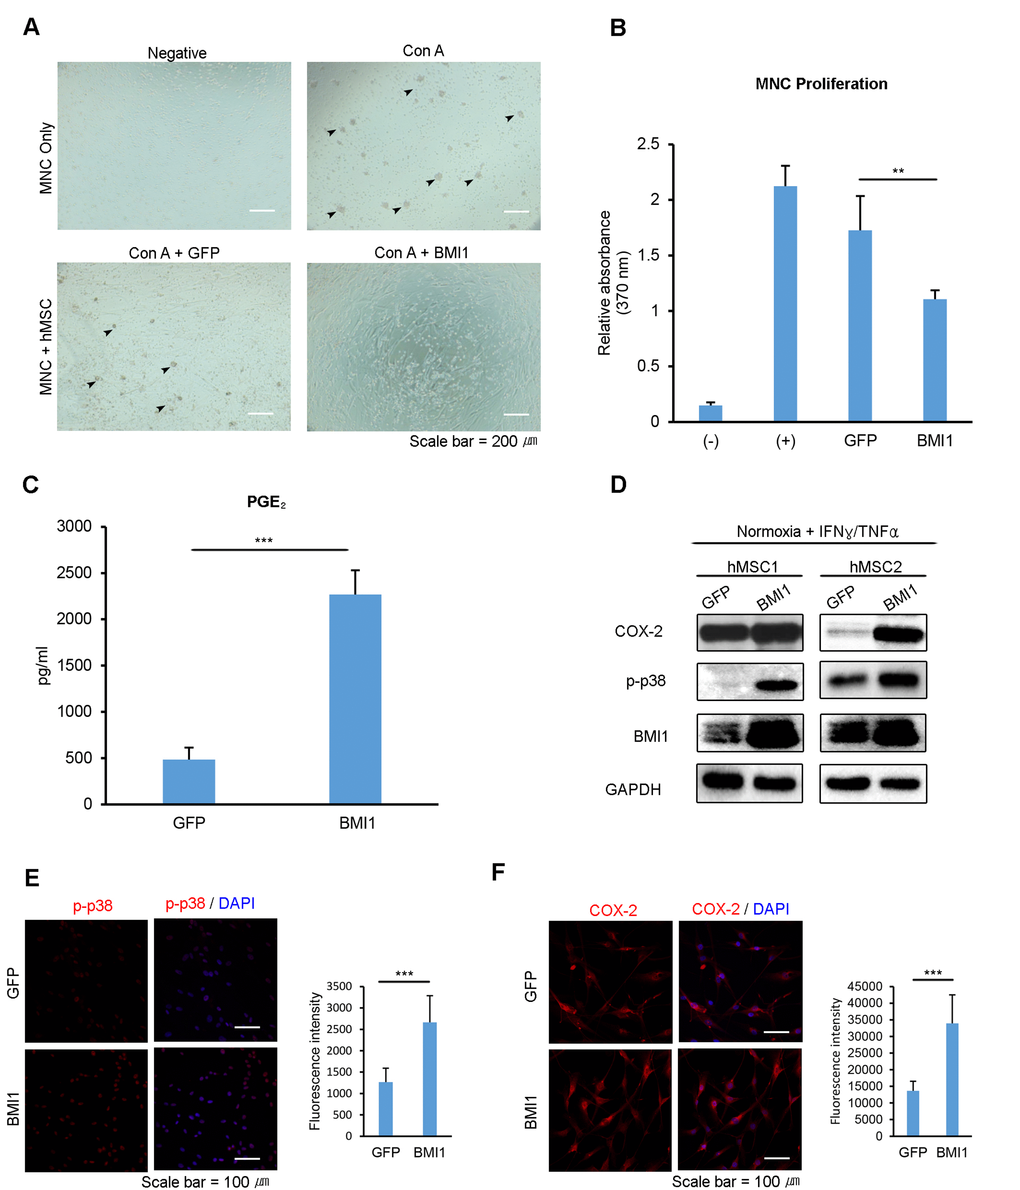 Up-regulation of BMI1 enhances the immunosuppressive effect of hUCB-MSCs. To investigate the immunosuppressive properties of BMI1-overexpressing hUCB-MSCs, (A) hUCB-MNCs were co-cultured with BMI1-overexpressing hUCB-MSCs and (B) the proliferation of hUCB-MNCs was measured with a BrdU proliferation assay kit. (C) PGE2 concentration was measured in the culture supernatant of GFP- and BMI1-overexpressing hUCB-MSCs. (D) COX-2, p-p38 MAP kinase and BMI1 expression levels of BMI1-overexpressing hUCB-MSCs were investigated via western blot analysis after treatment with IFN-γ and TNF-α for 30 minutes. (E) Expression of the phosphorylated form of p38 MAP kinase in GFP- and BMI1-up-regulated hUCB-MSCs was determined via immunocytochemistry after treatment with IFN-γ and TNF-α for 30 minutes. The graph shows the fluorescence intensity of p-p38 in each cells. (F) COX-2 expression was investigated after treatment with IFN-γ and TNF-α for 24 hours. On the right, the graph indicating the fluorescence intensity of COX-2 is presented. The results show 1 representative of 3 independent experiments. Error bars represent mean±s.e.m. from three separate experiments. Error bars represent mean±s.e.m. from three separate experiments. ** PPt-test.